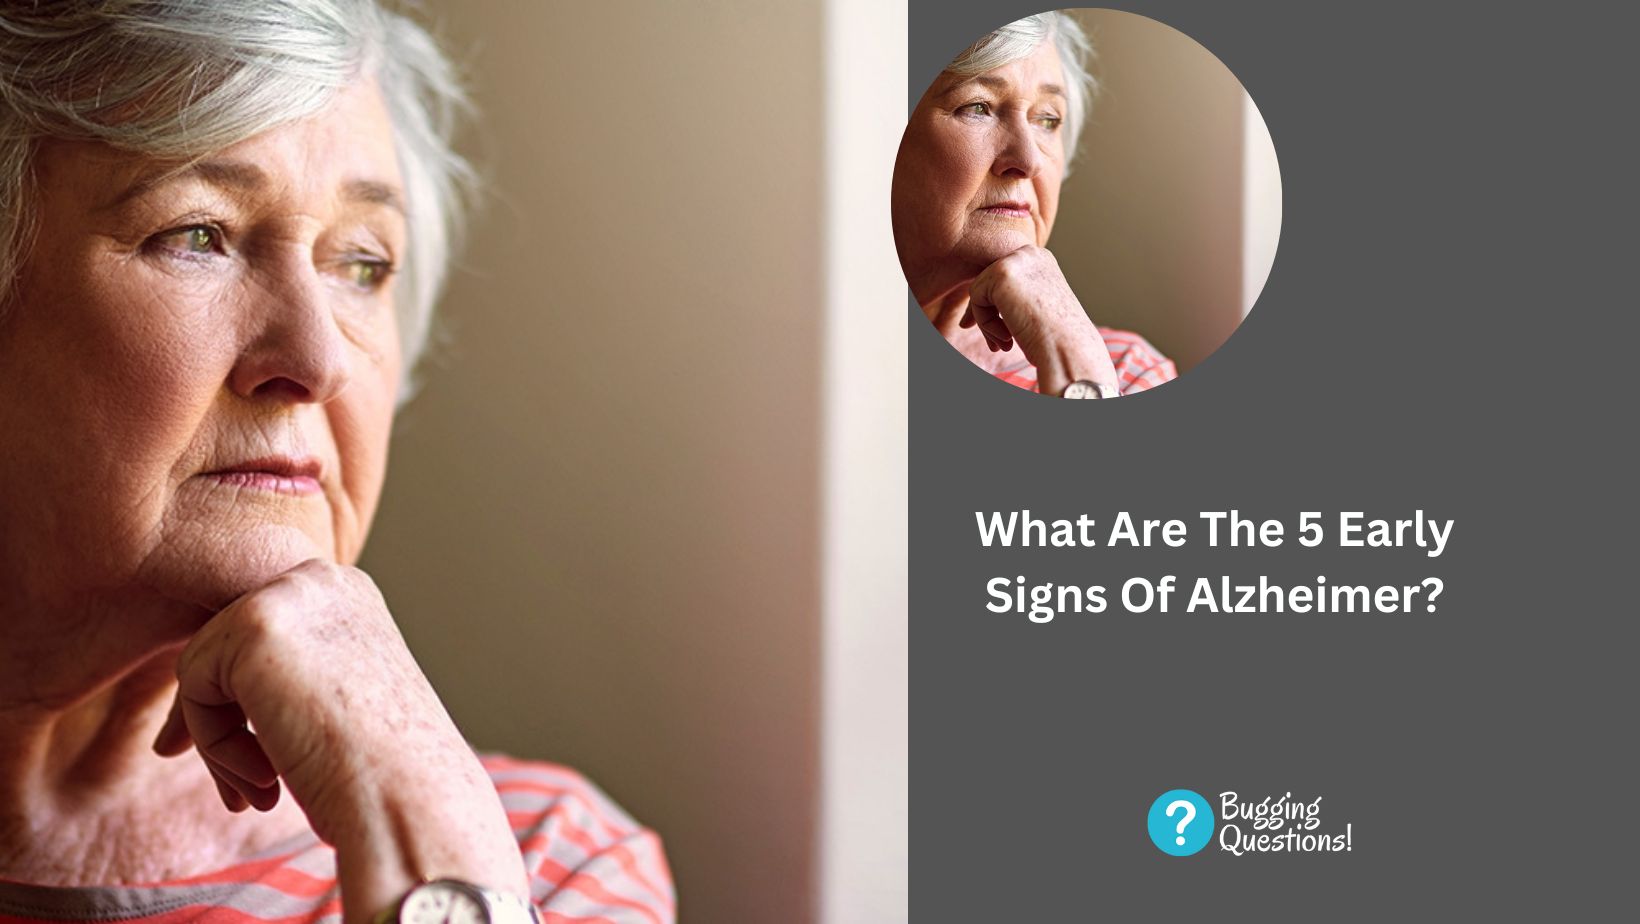 What Are The 5 Early Signs Of Alzheimer?